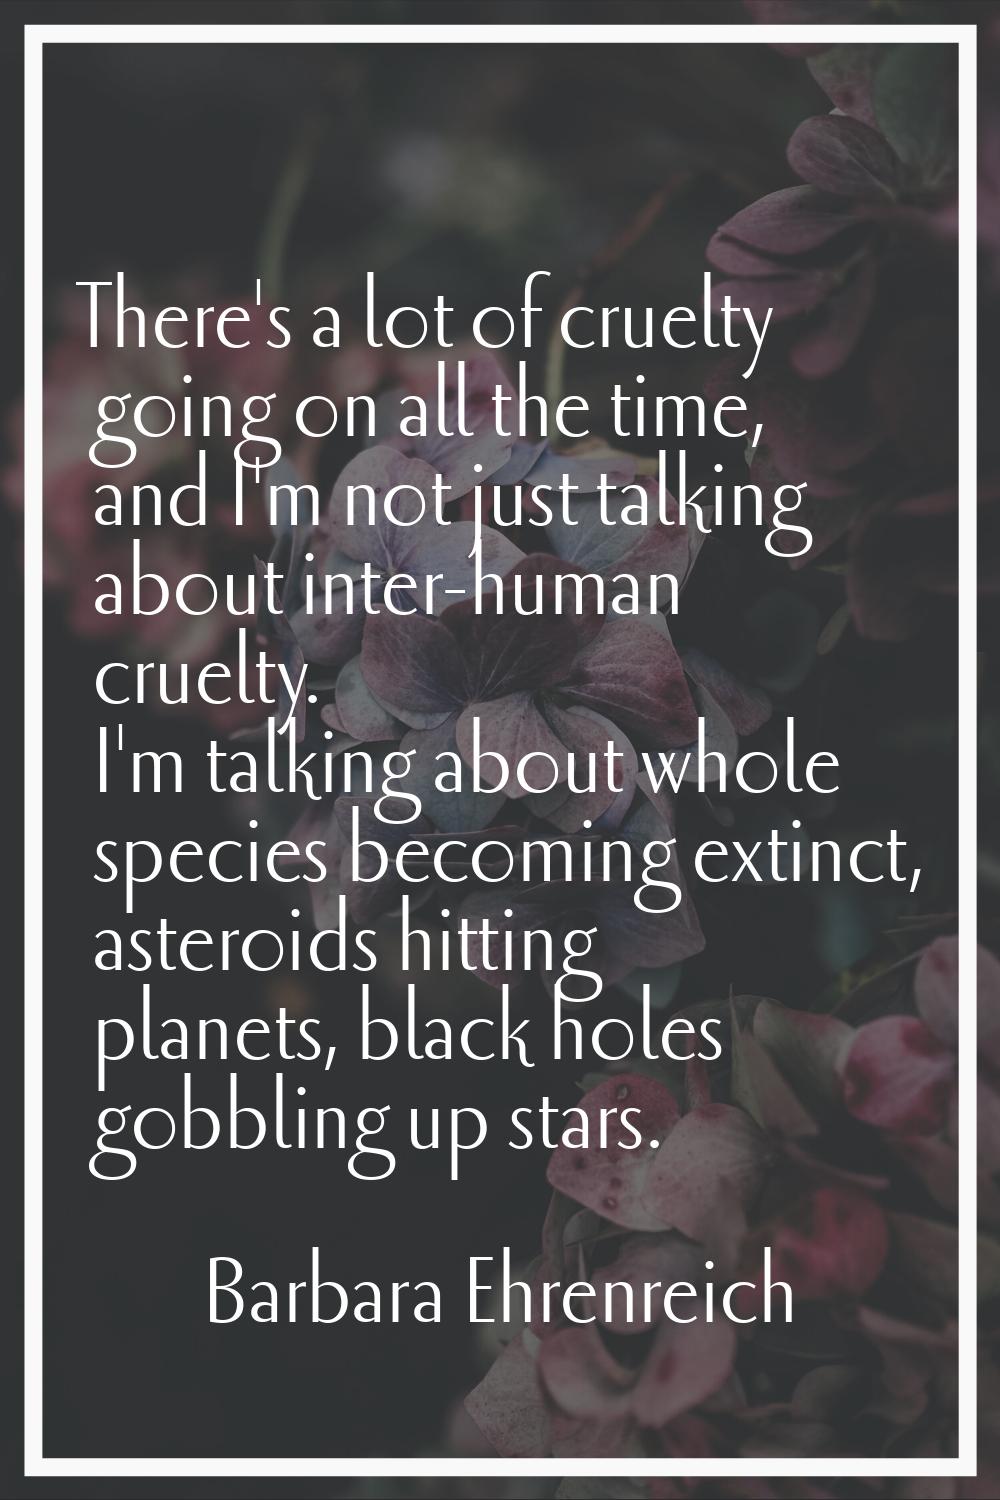 There's a lot of cruelty going on all the time, and I'm not just talking about inter-human cruelty.